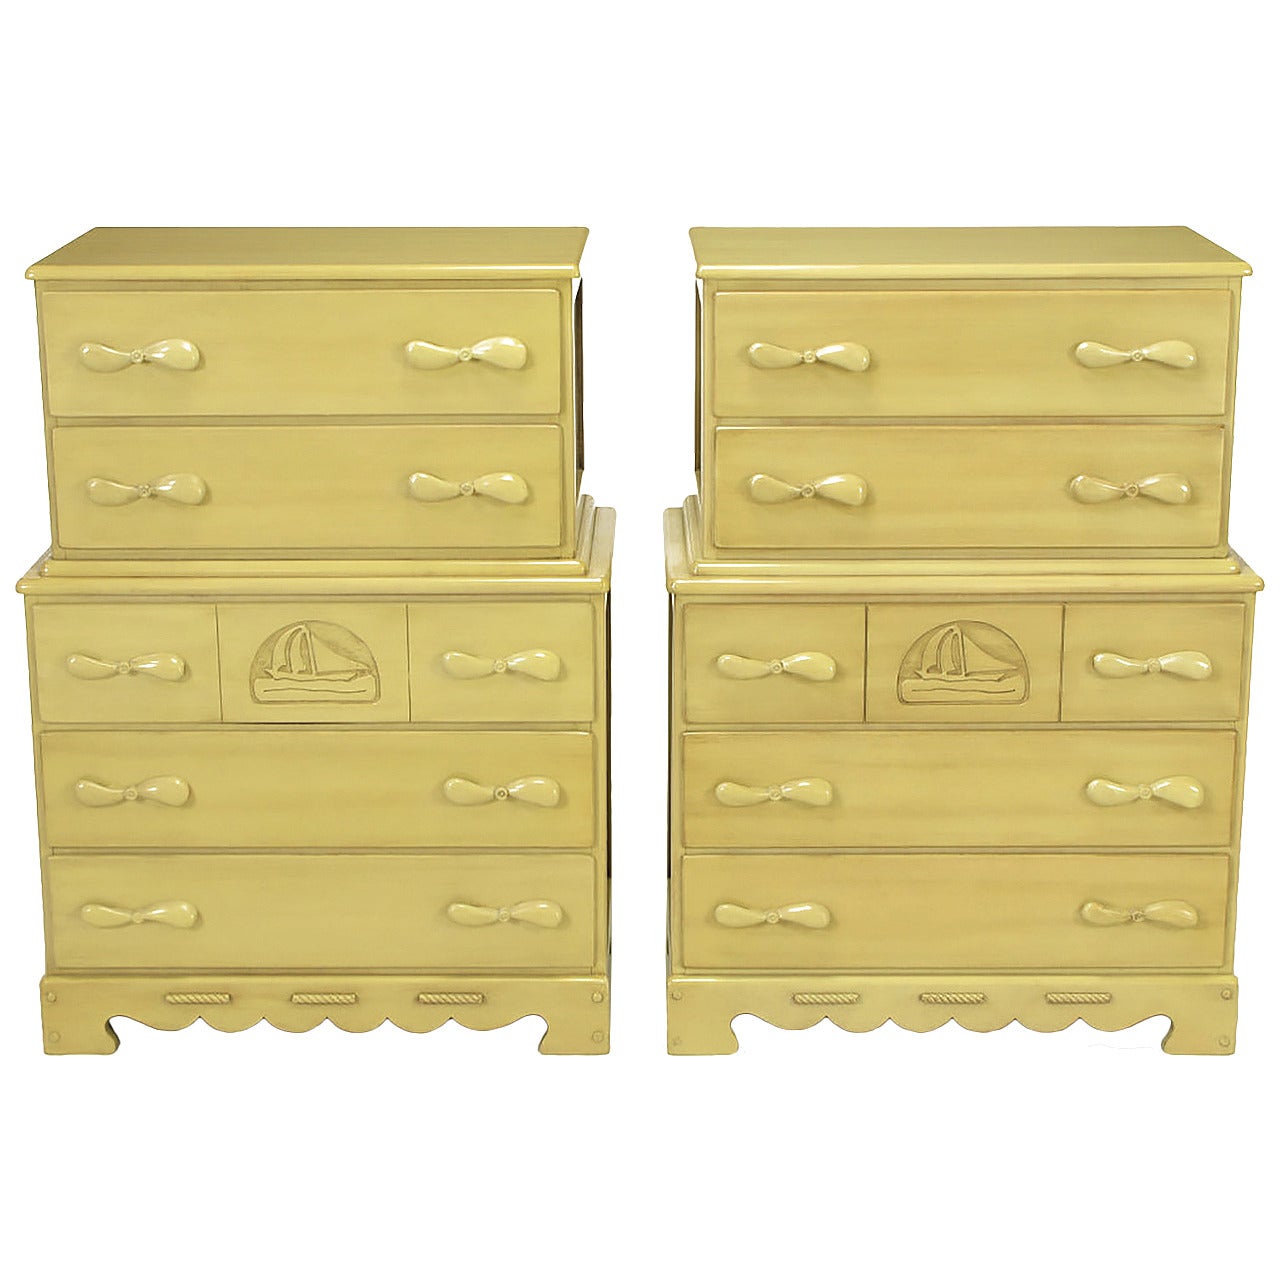 Pair of Five-Drawer Tall Chests with Propeller Pulls and Sailboat Reliefs